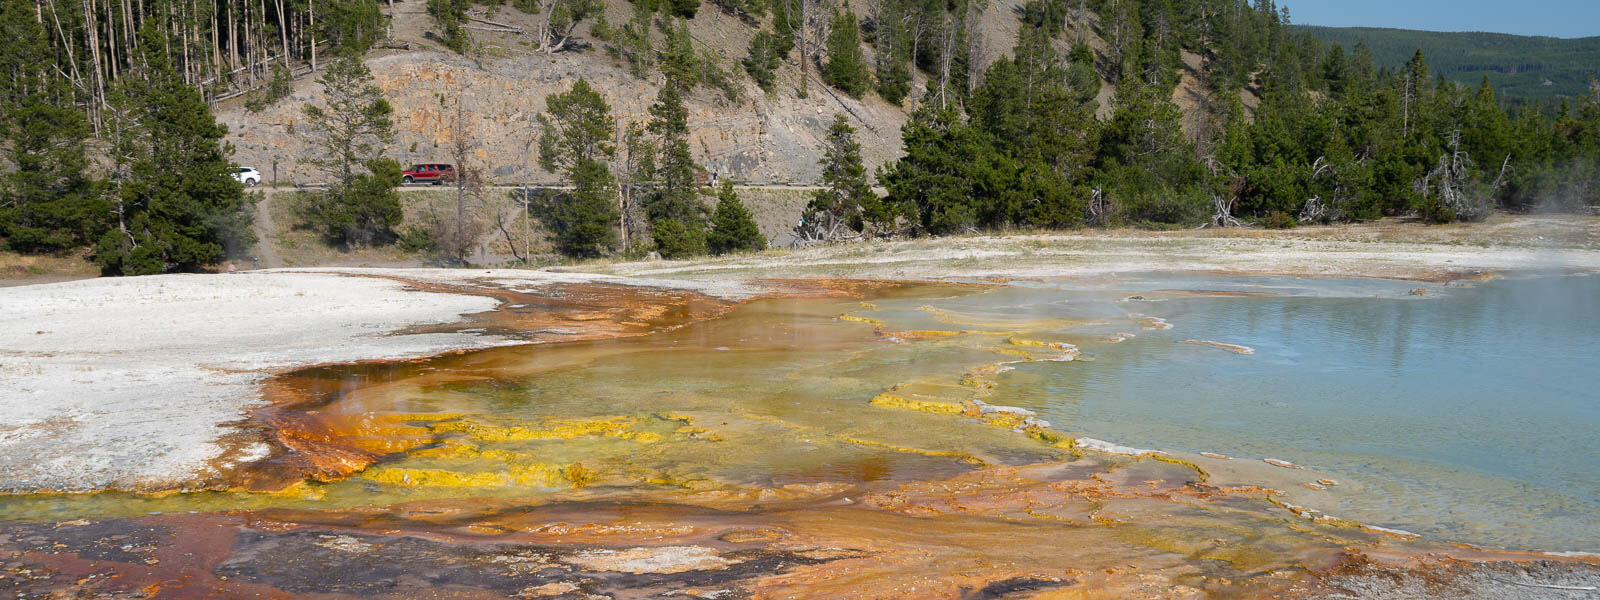 The hot springs of Yellowstone